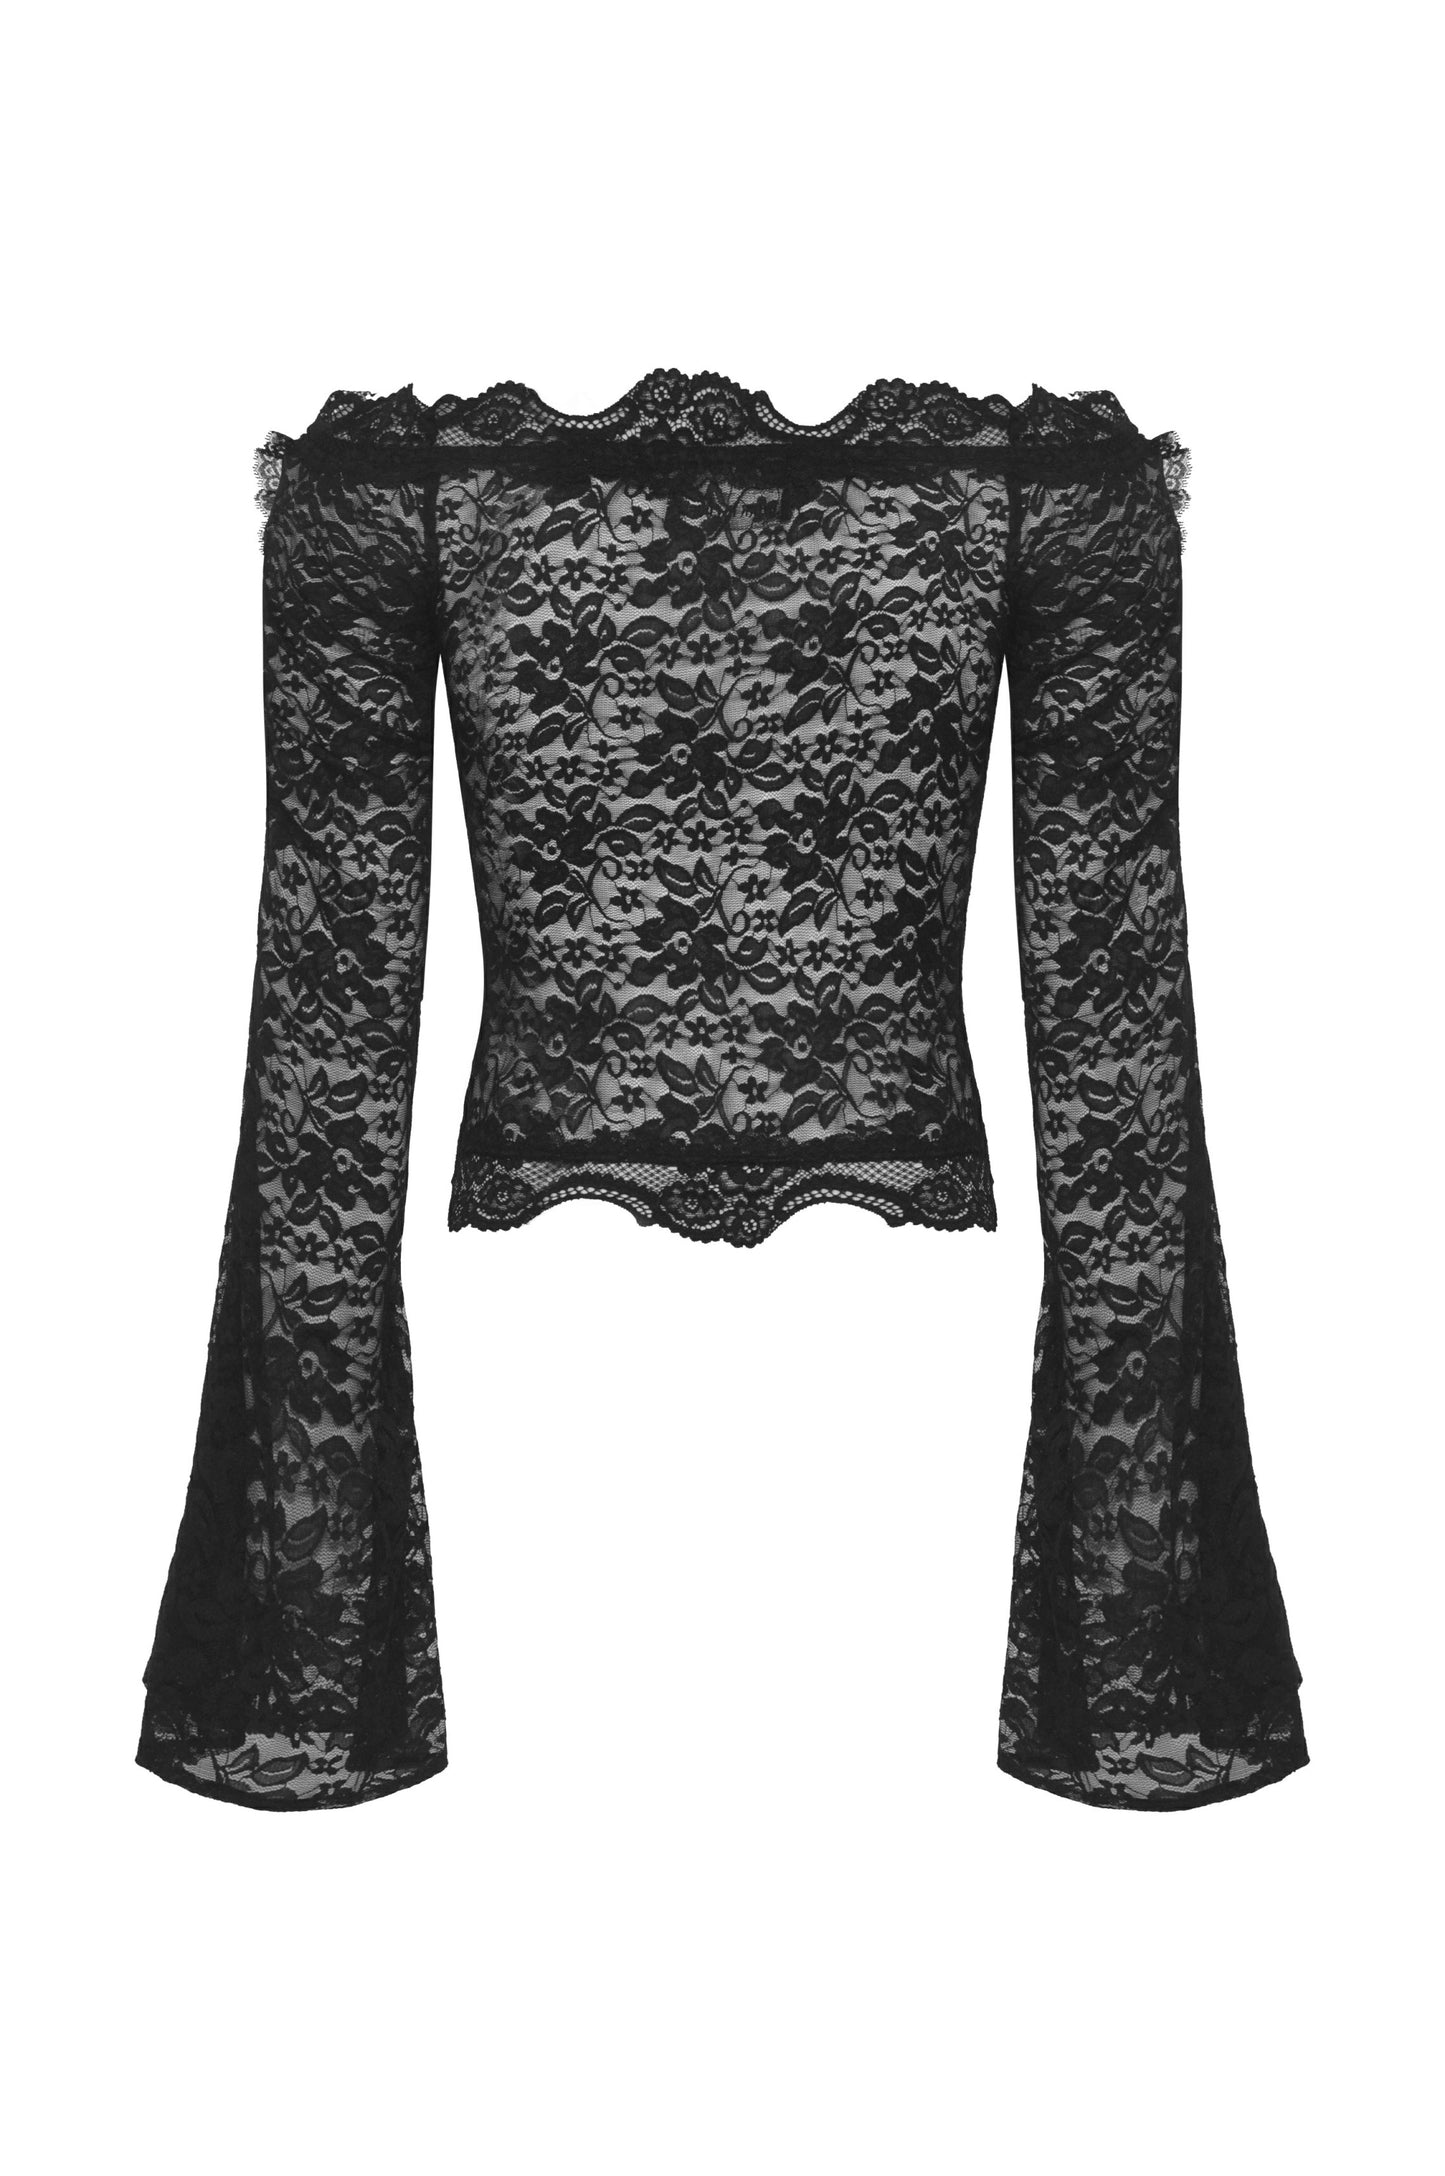 Beat The Devil Off Shoulder Lace Top by Dark In Love